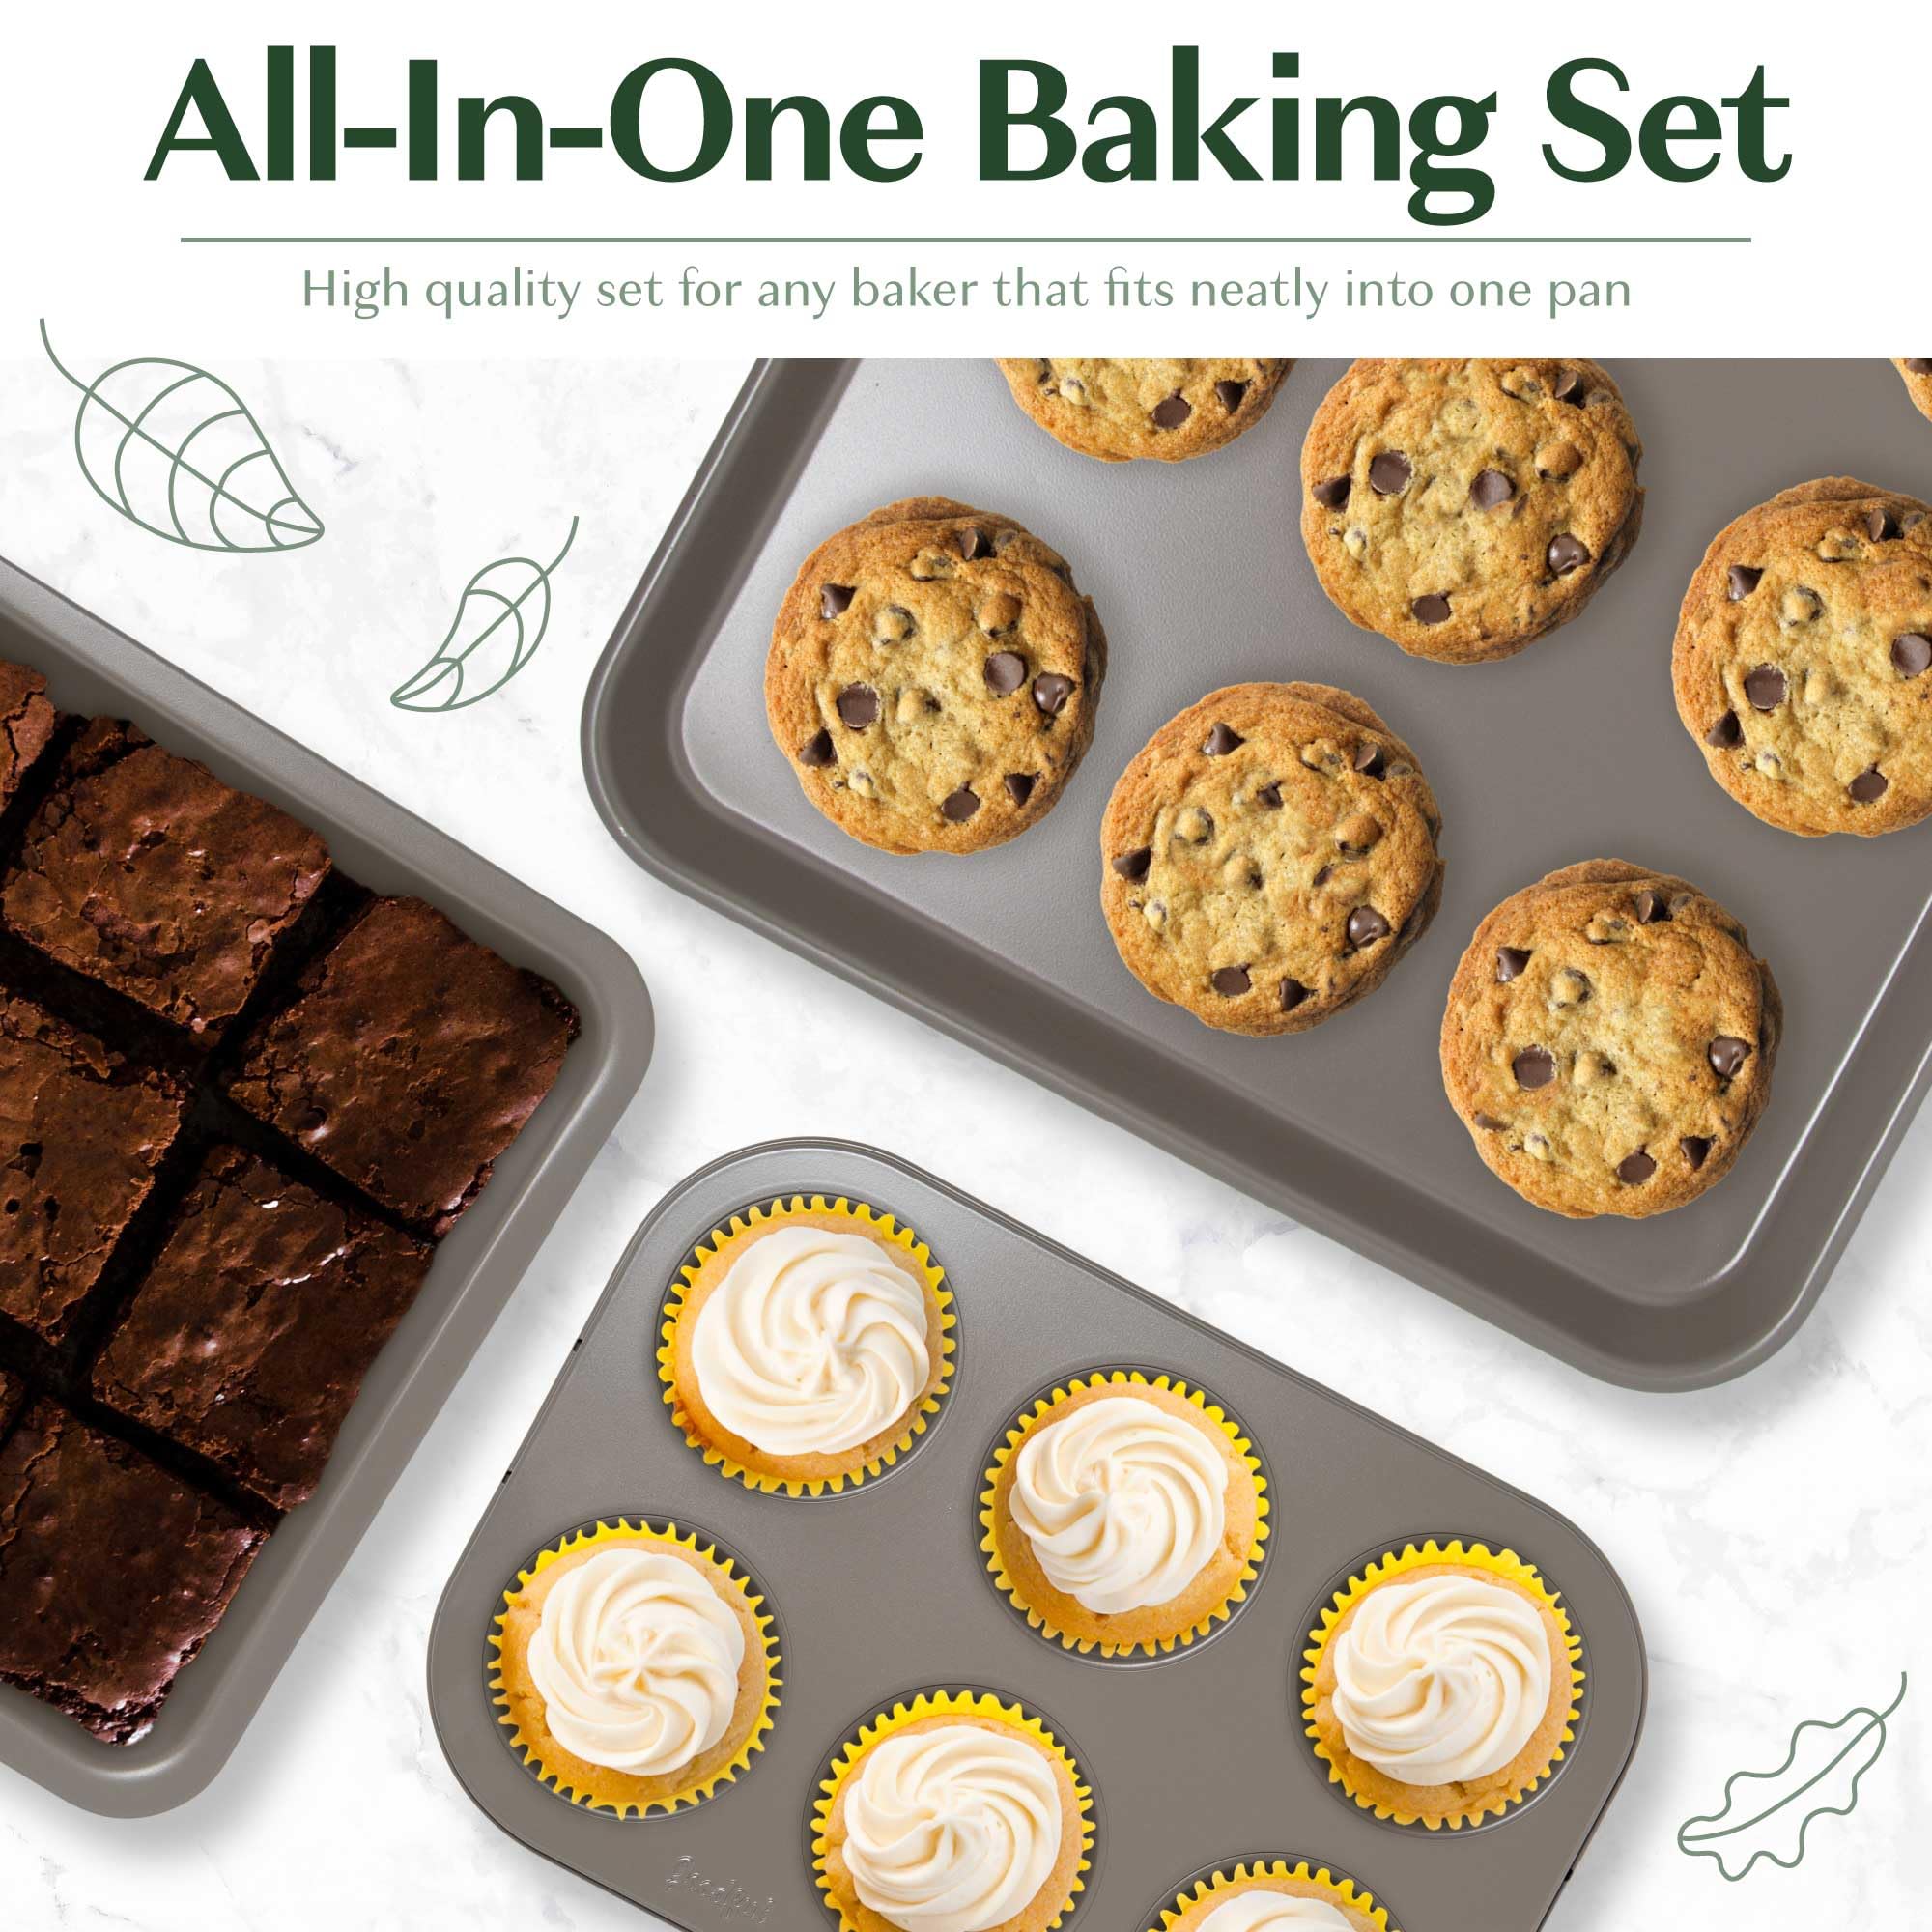 Goodful All-In-One Nonstick Bakeware Set, Stackable and Space Saving Design includes Round and Square Pans, Muffin Pans, Cookie Sheet and Roaster, Dishwasher Safe, 8-Piece, Terracotta